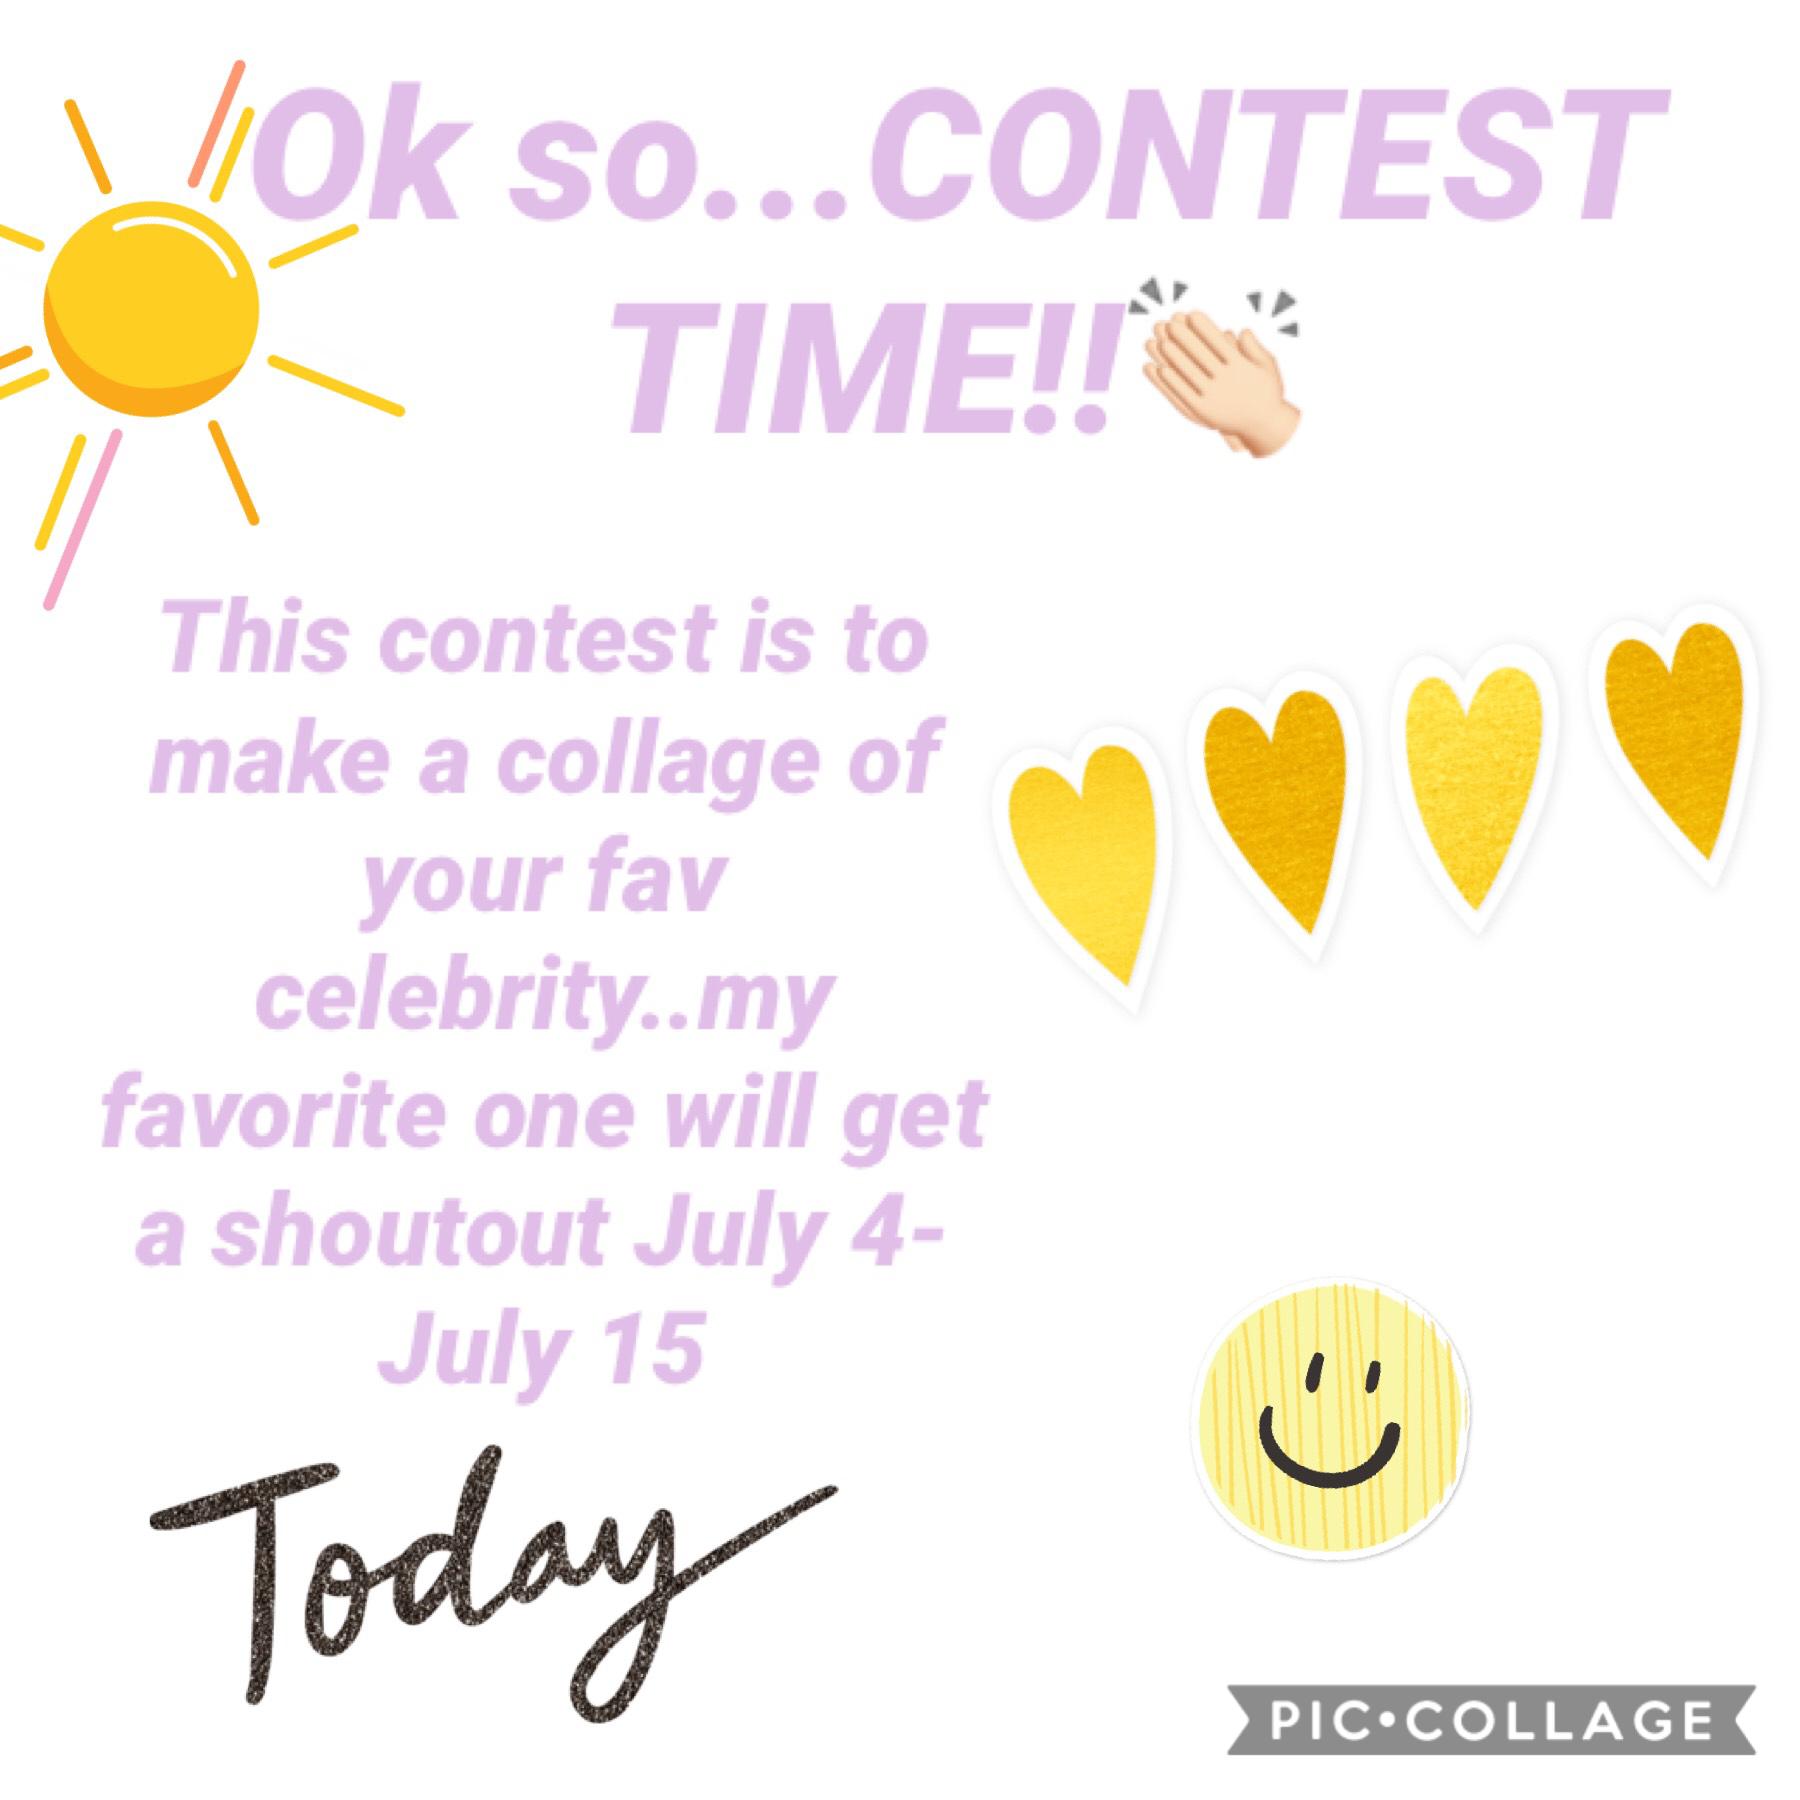 Contest time!!!